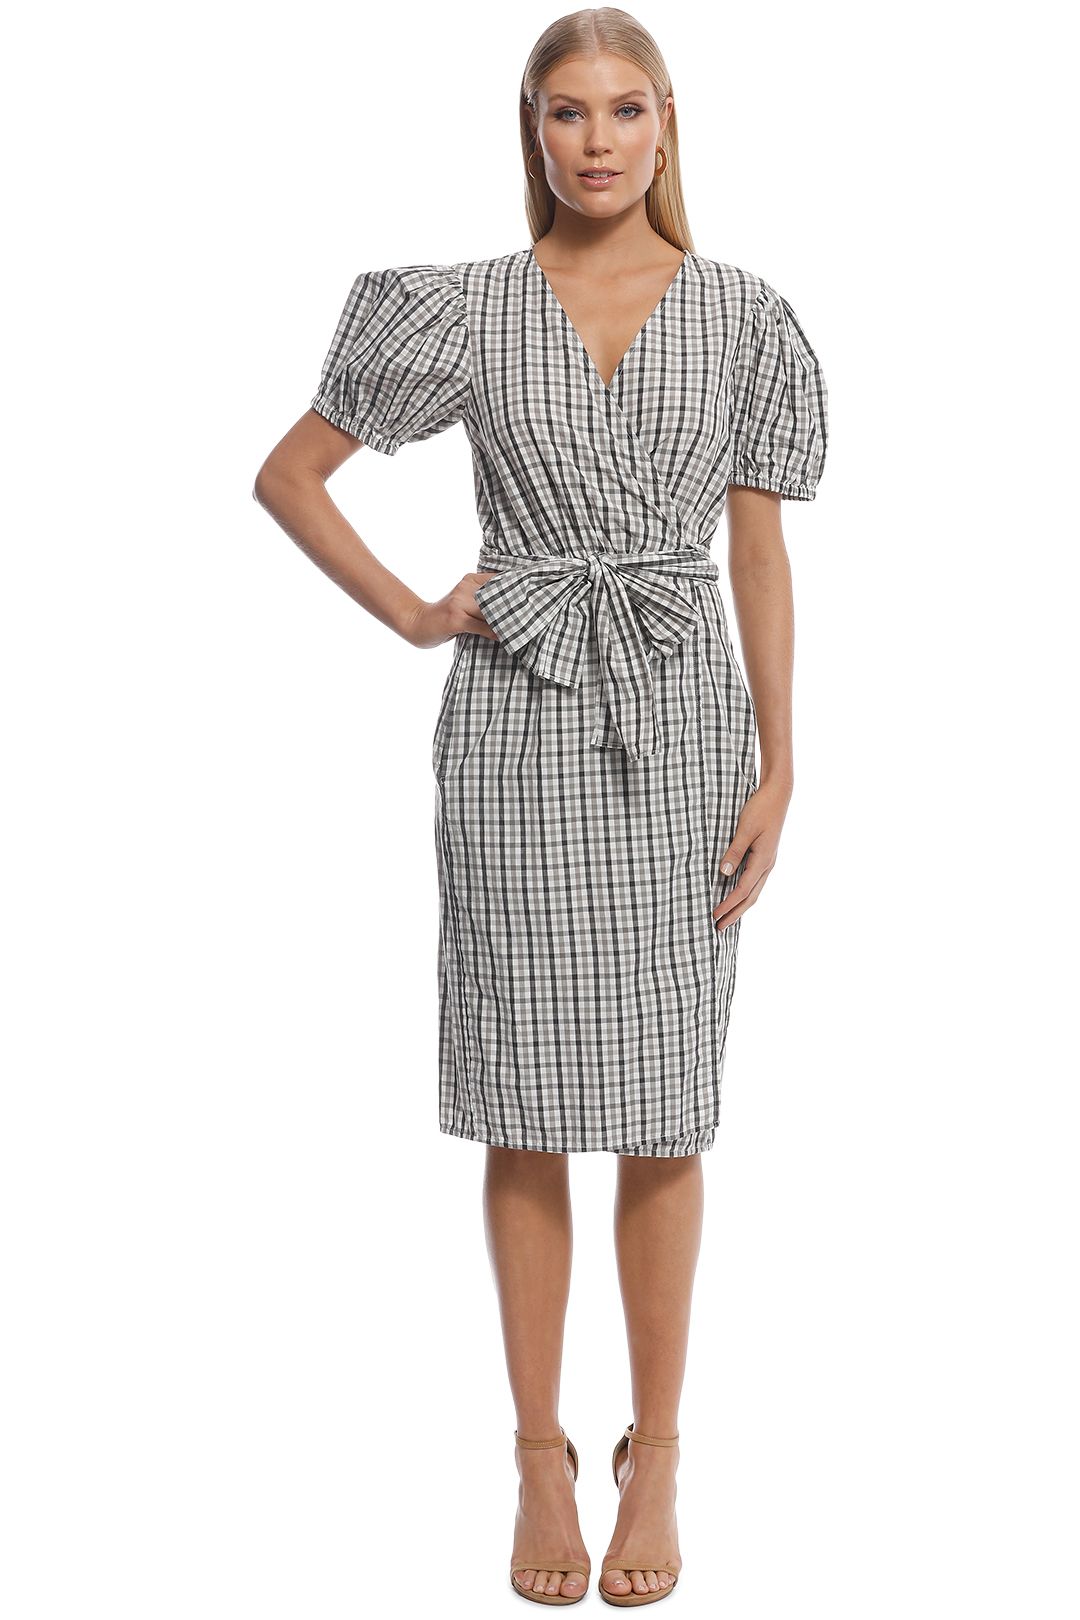 Scanlan Theodore - Gingham Wrap Front Dress - White - Front